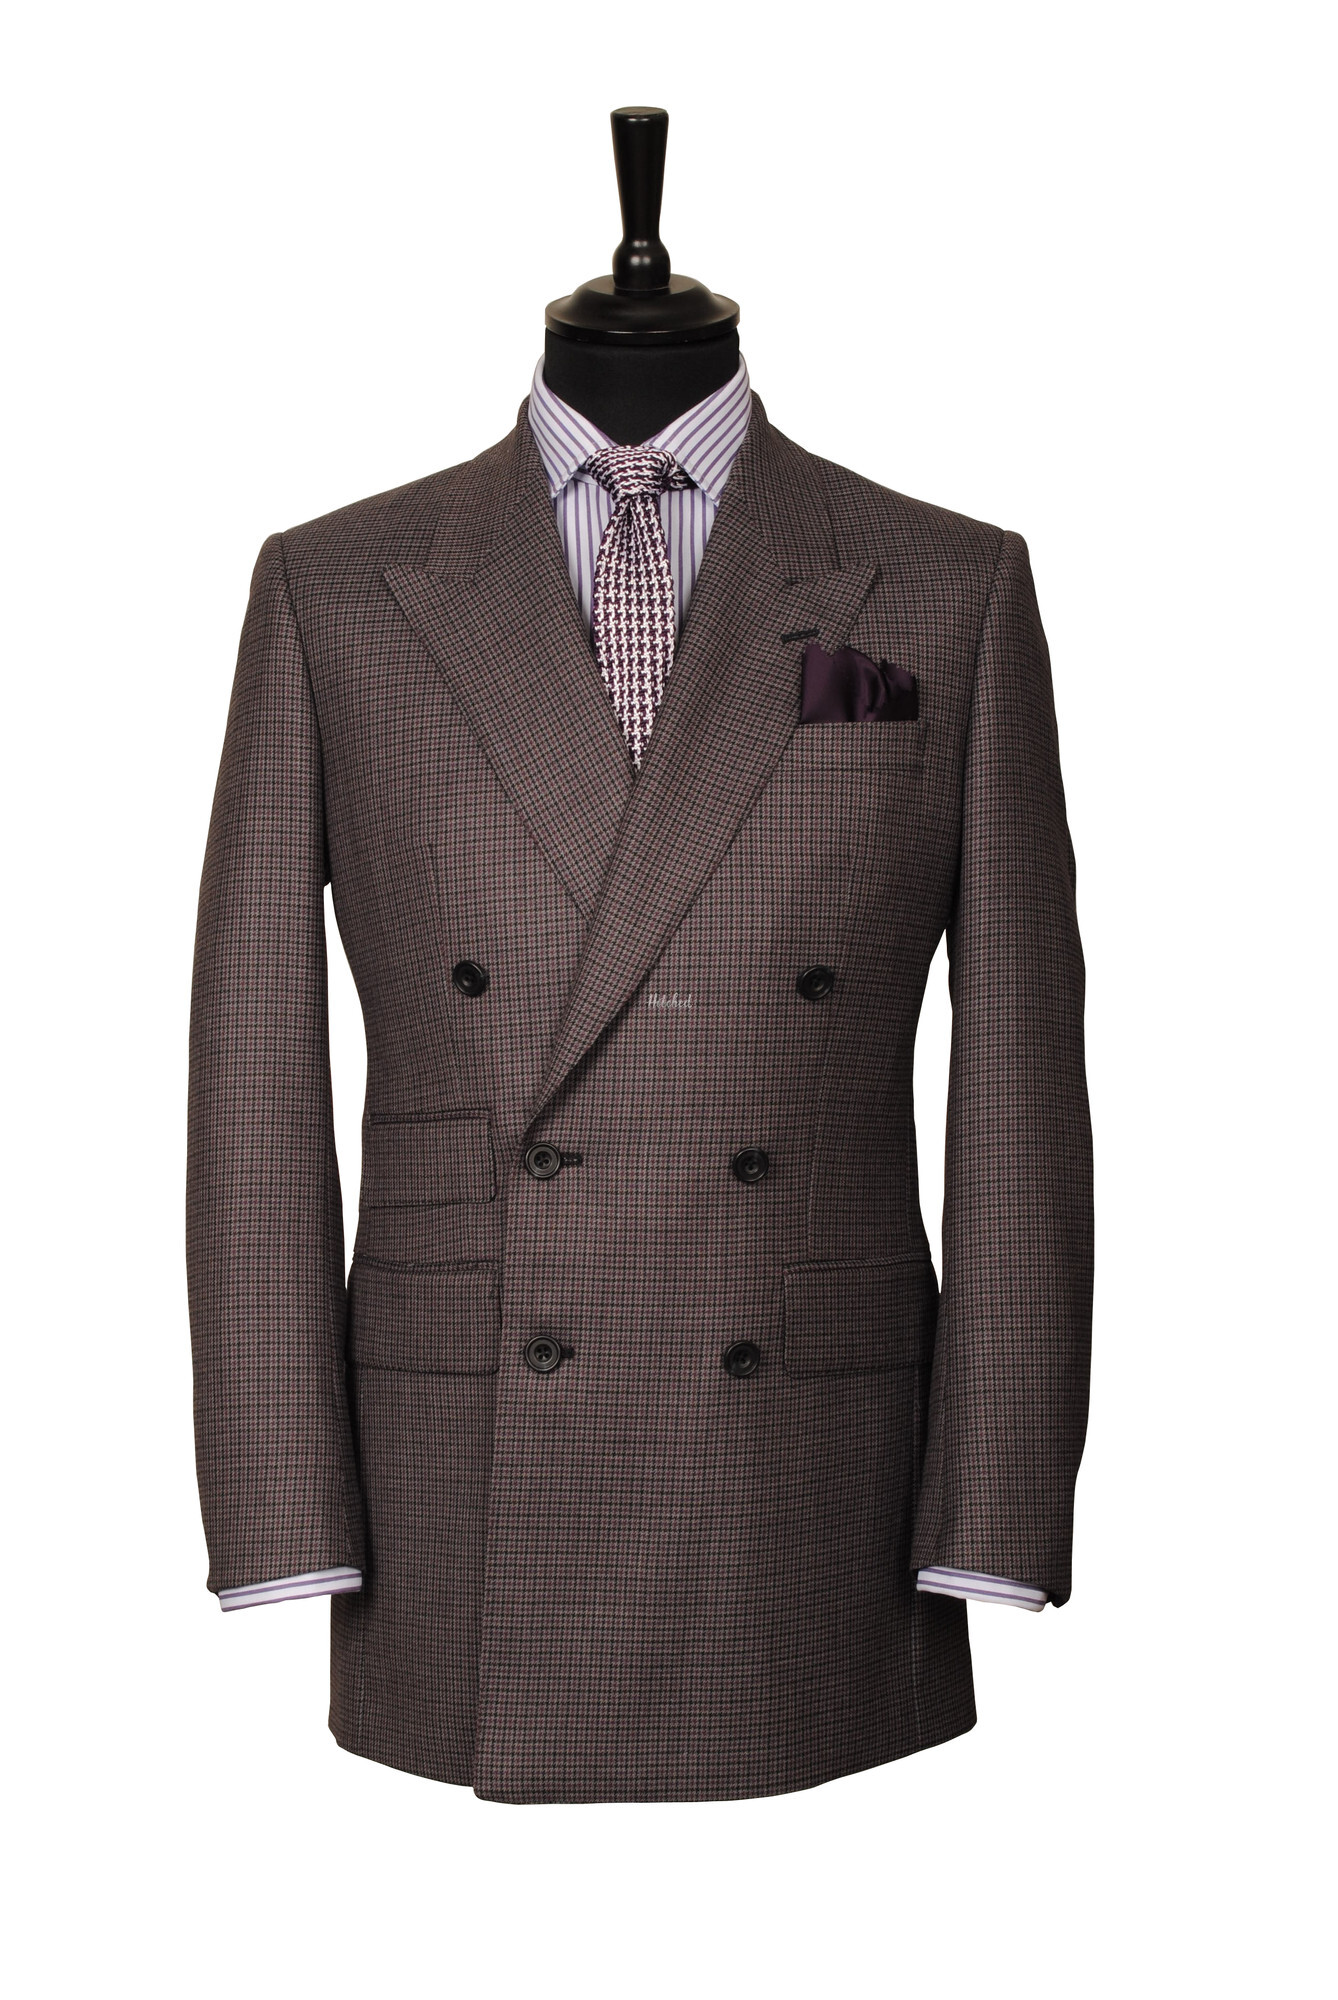 Purple Houndstooth Mens Wedding Suit from King & Allen - hitched.co.uk